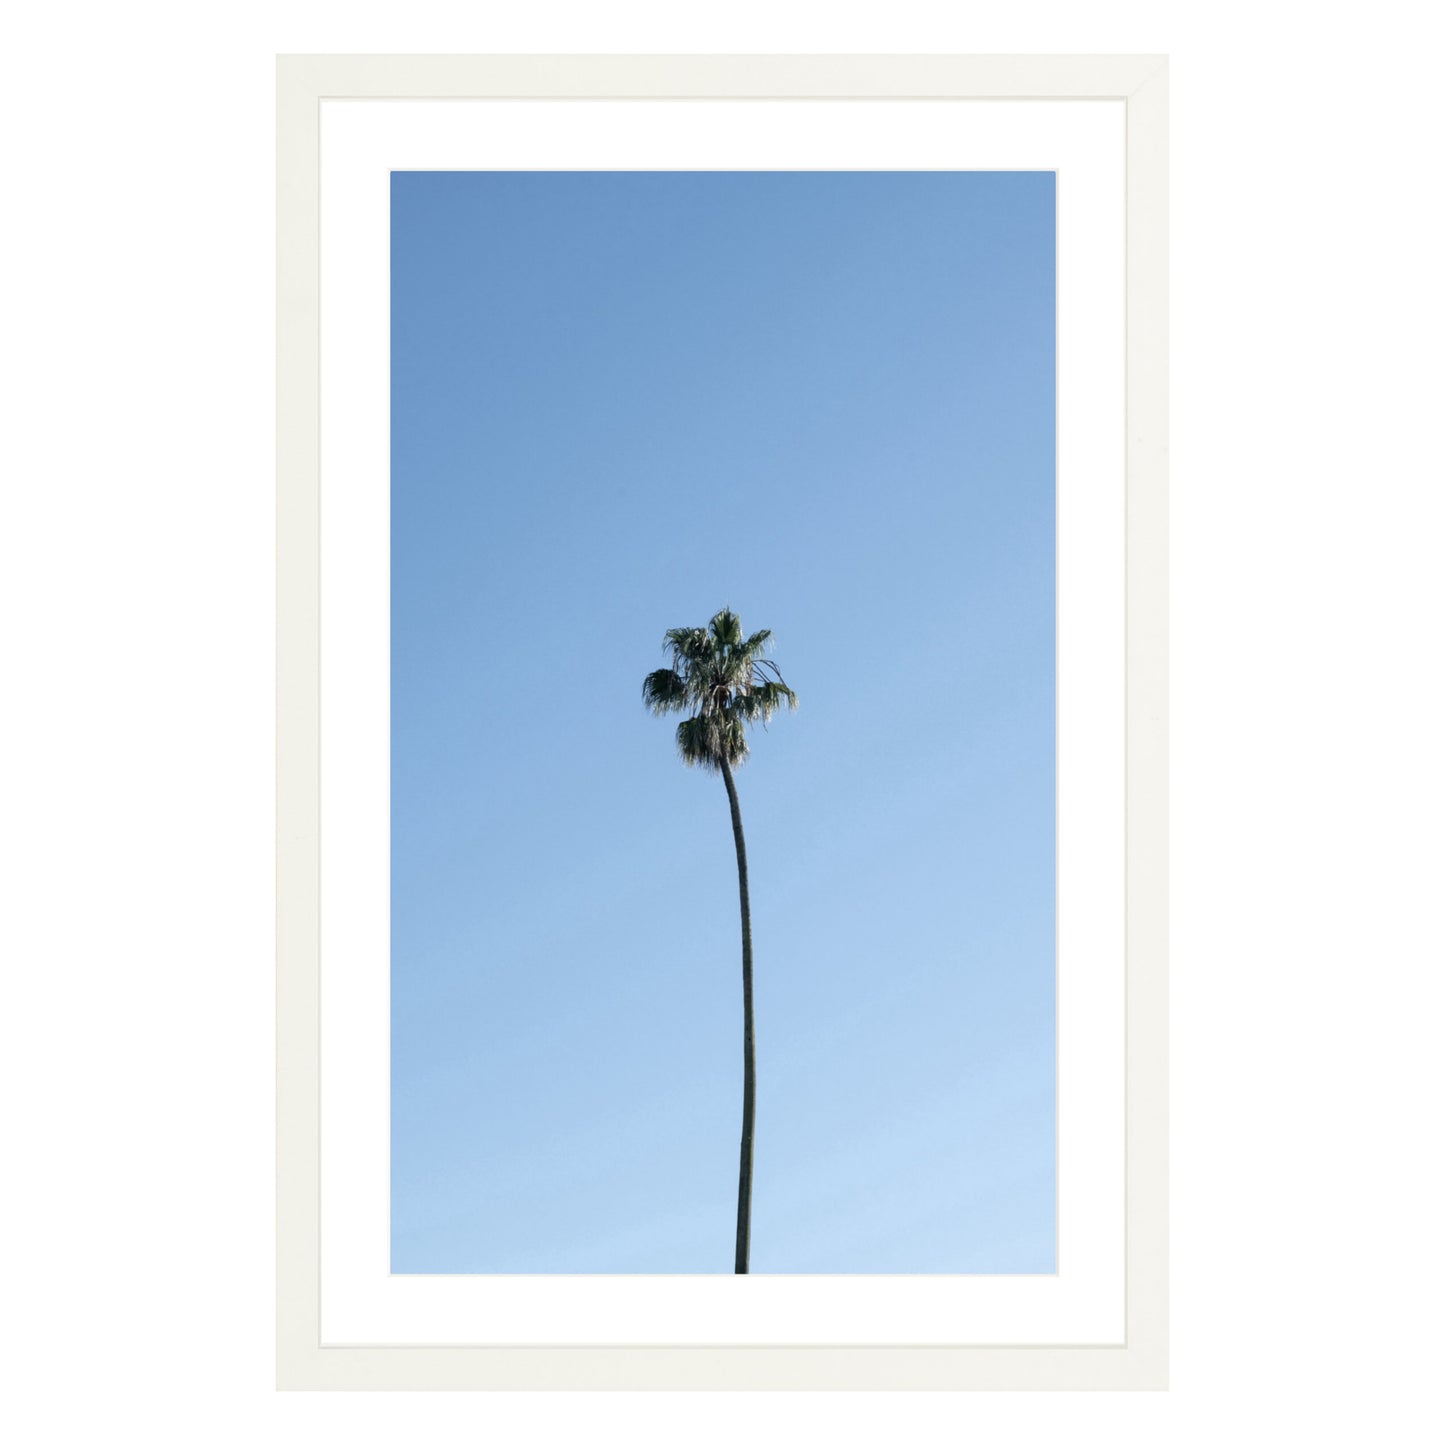 Photograph of single palm tree in front of blue sky in white frame with white mat